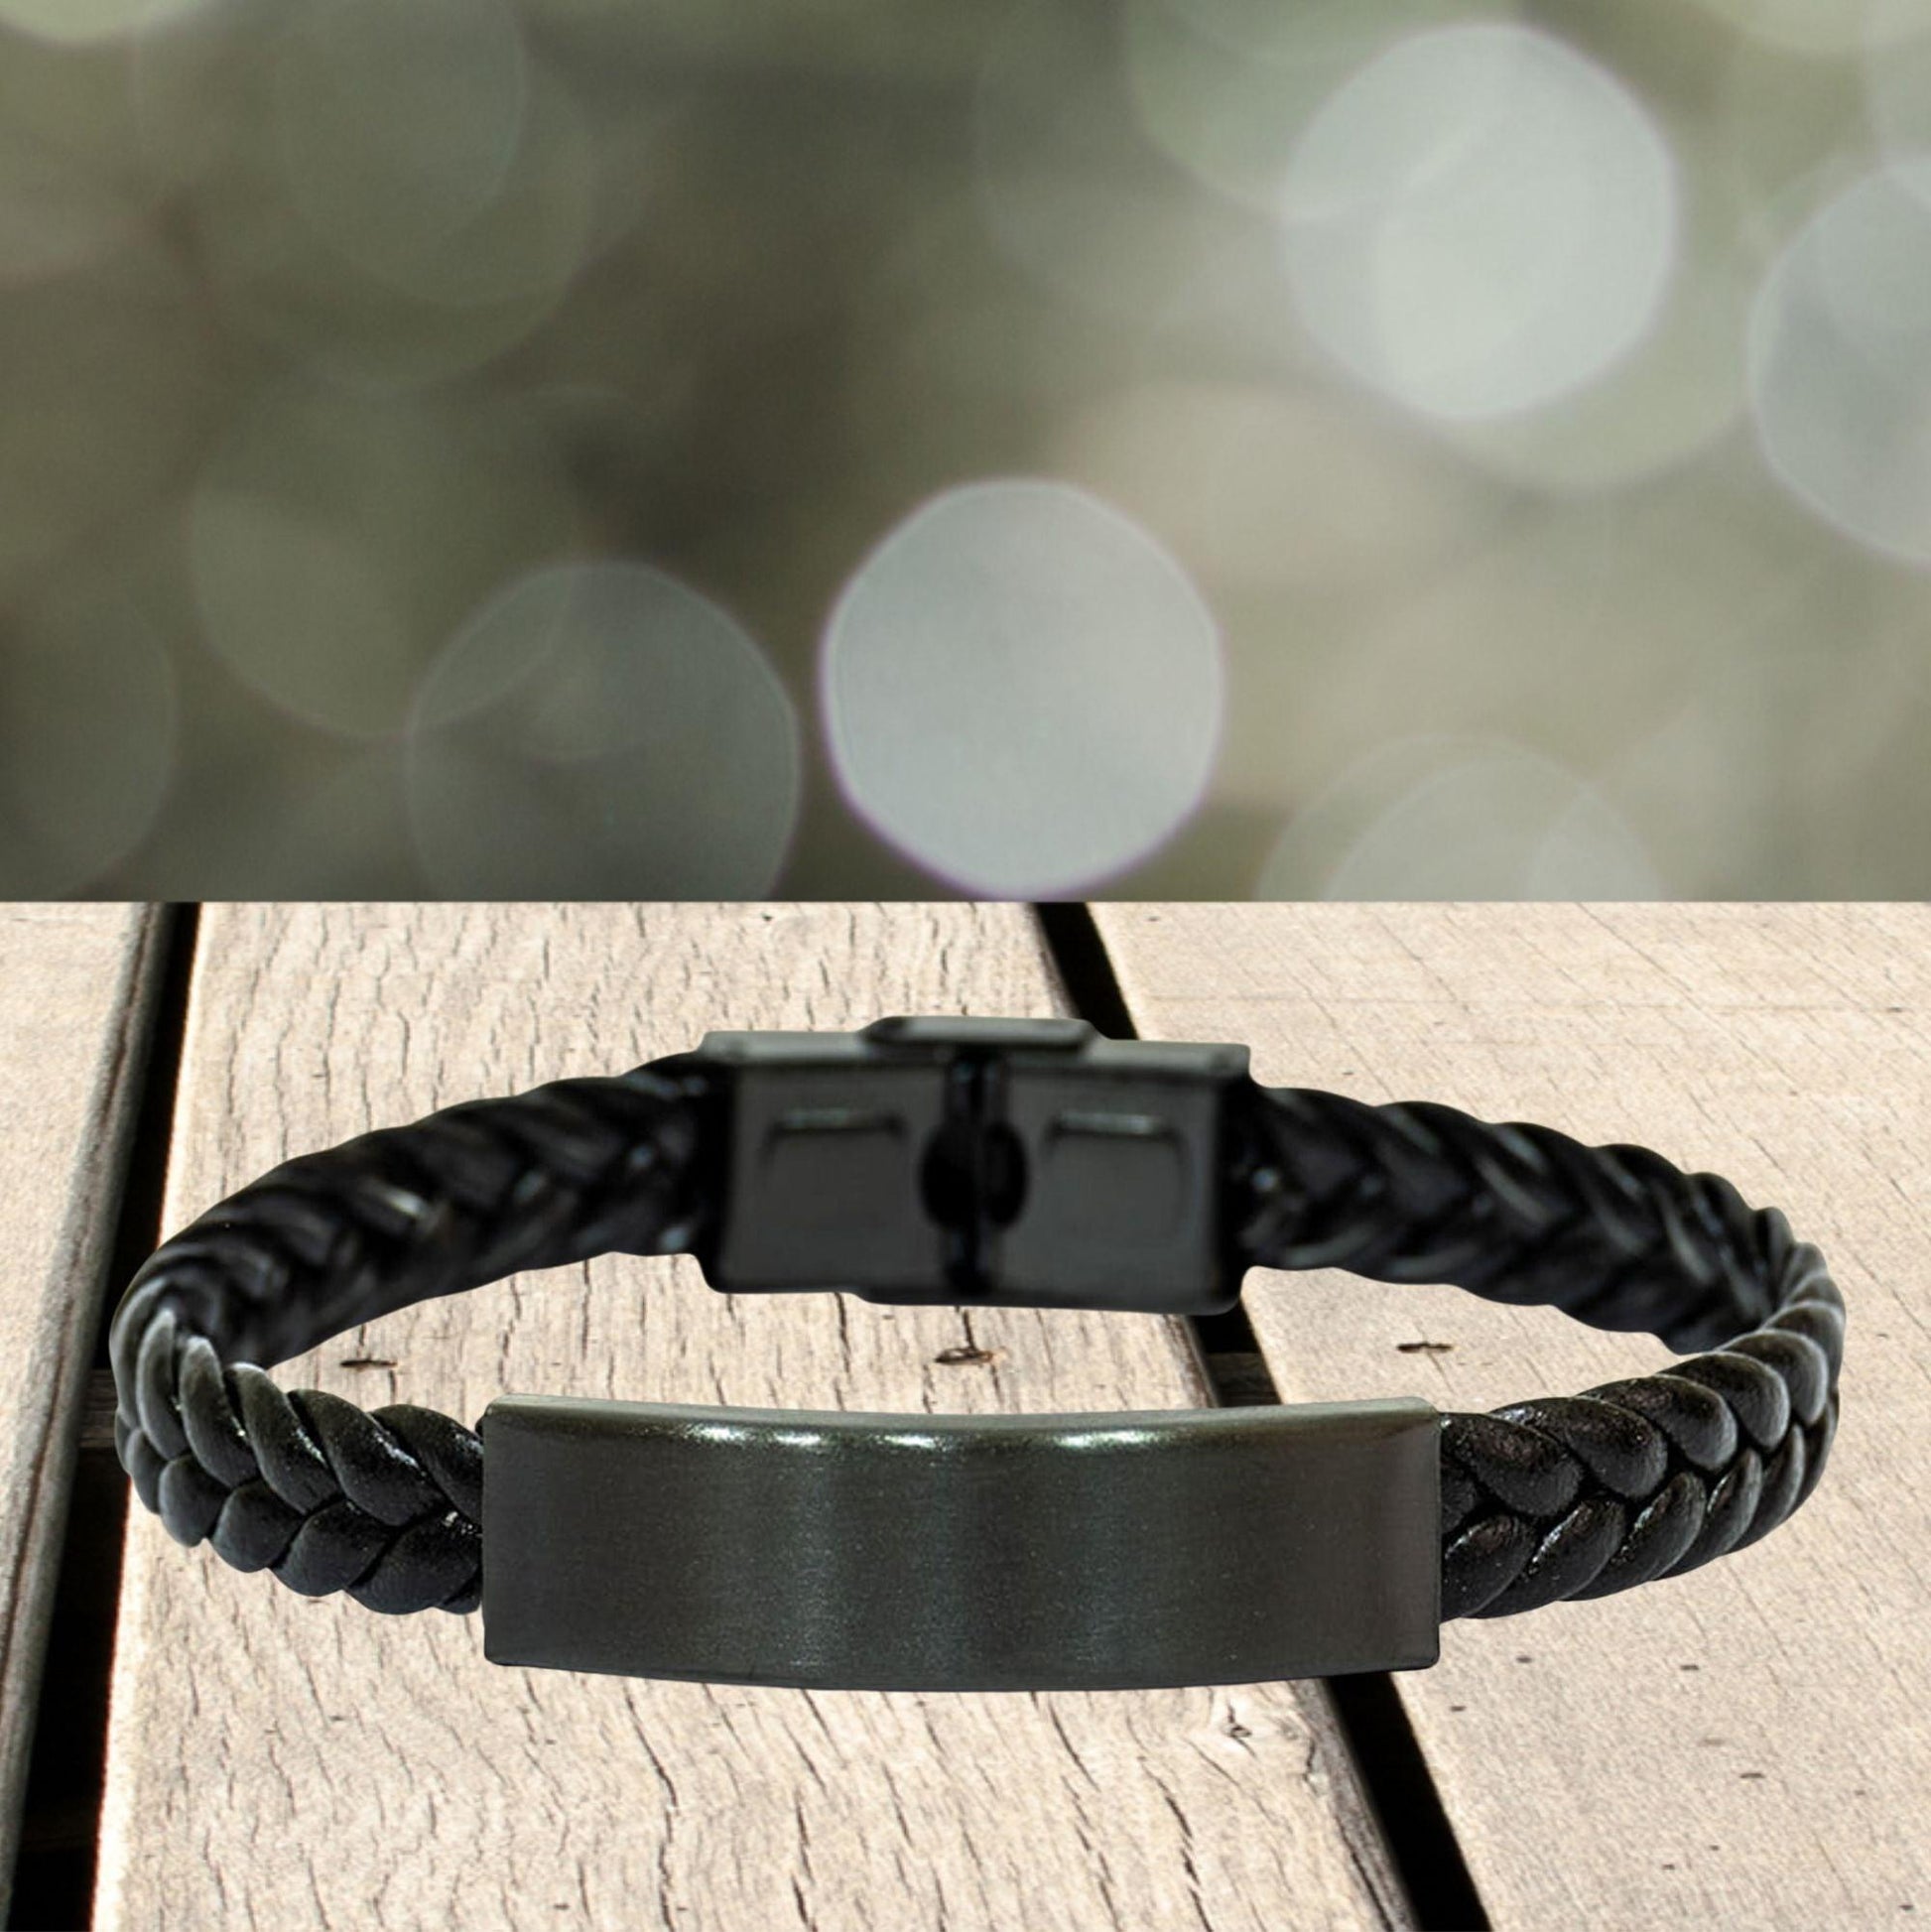 Sarcastic Correctional Officer Braided Leather Bracelet Gifts, Christmas Holiday Gifts for Correctional Officer Birthday, Correctional Officer: Because greatness is woven into the fabric of every day, Coworkers, Friends - Mallard Moon Gift Shop